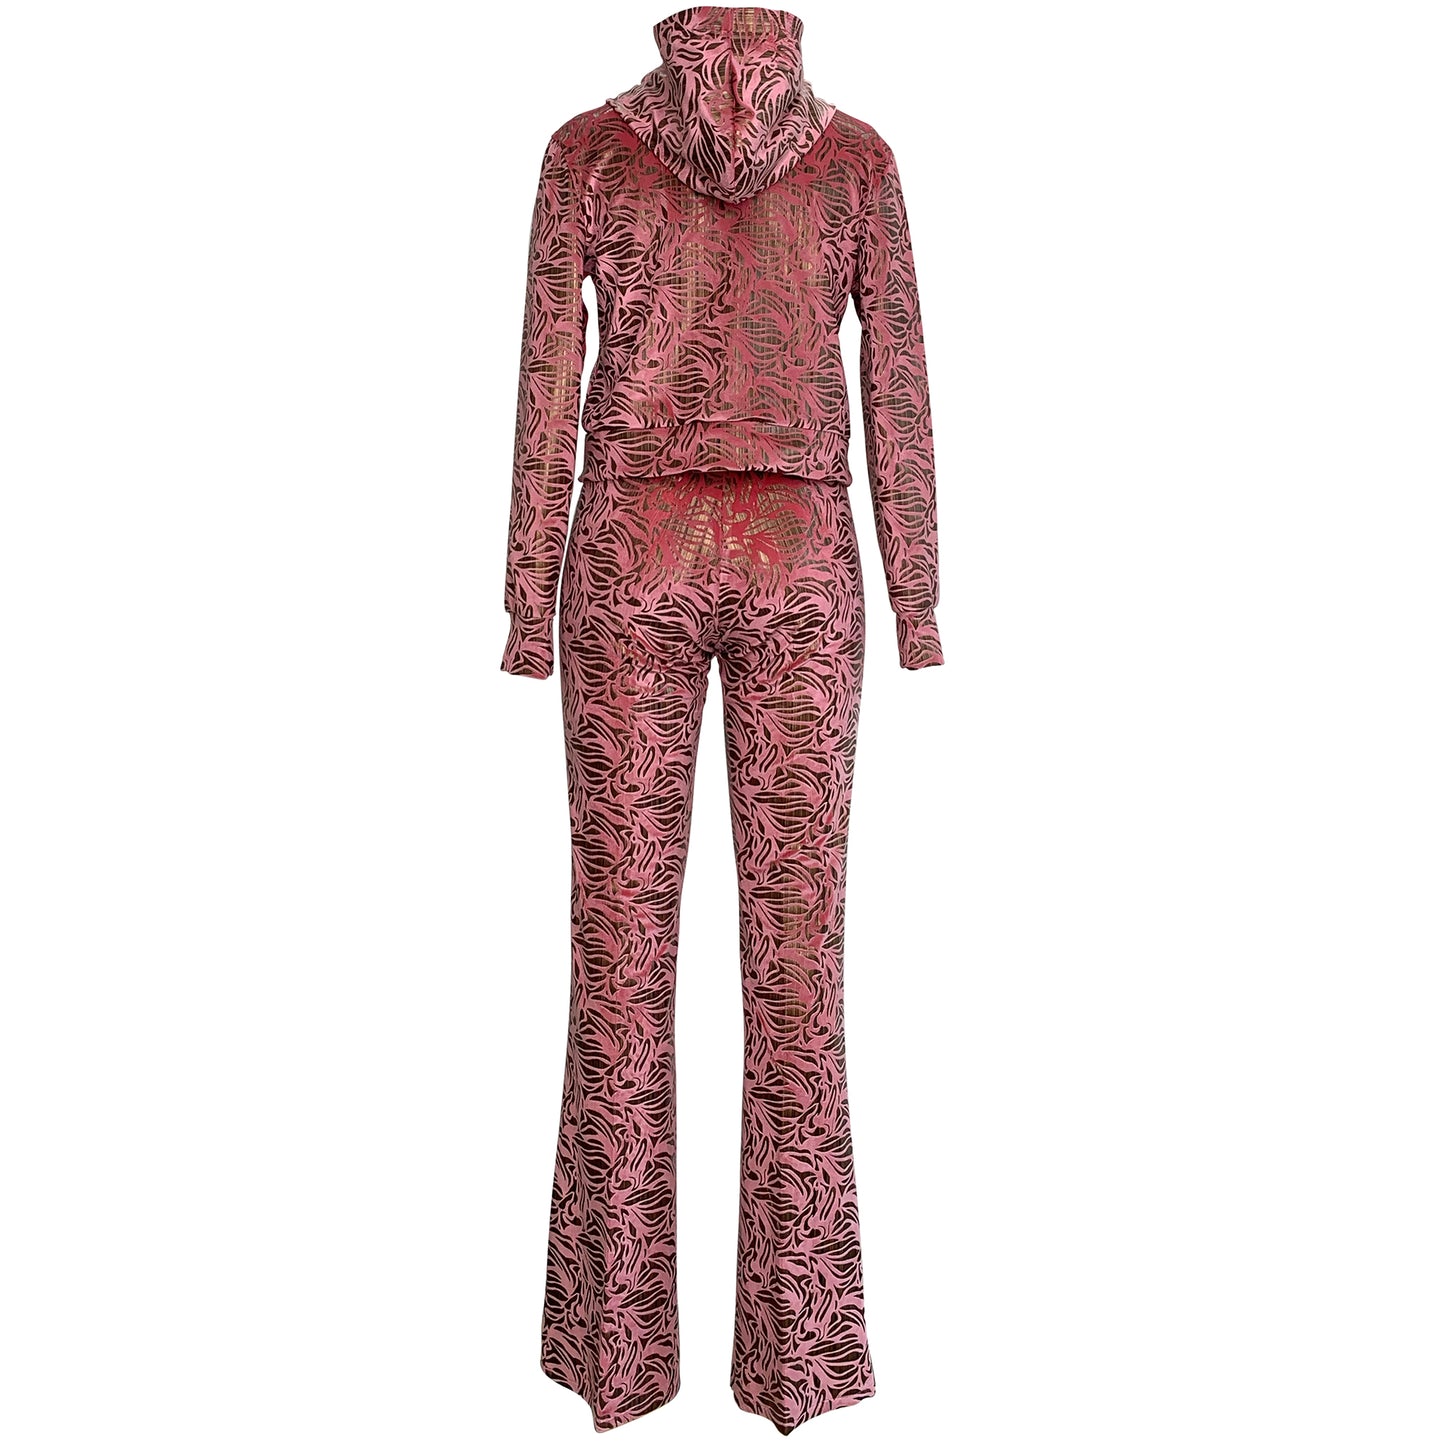 Cesar Galindo Limited Edition Rose Tracksuit Pants